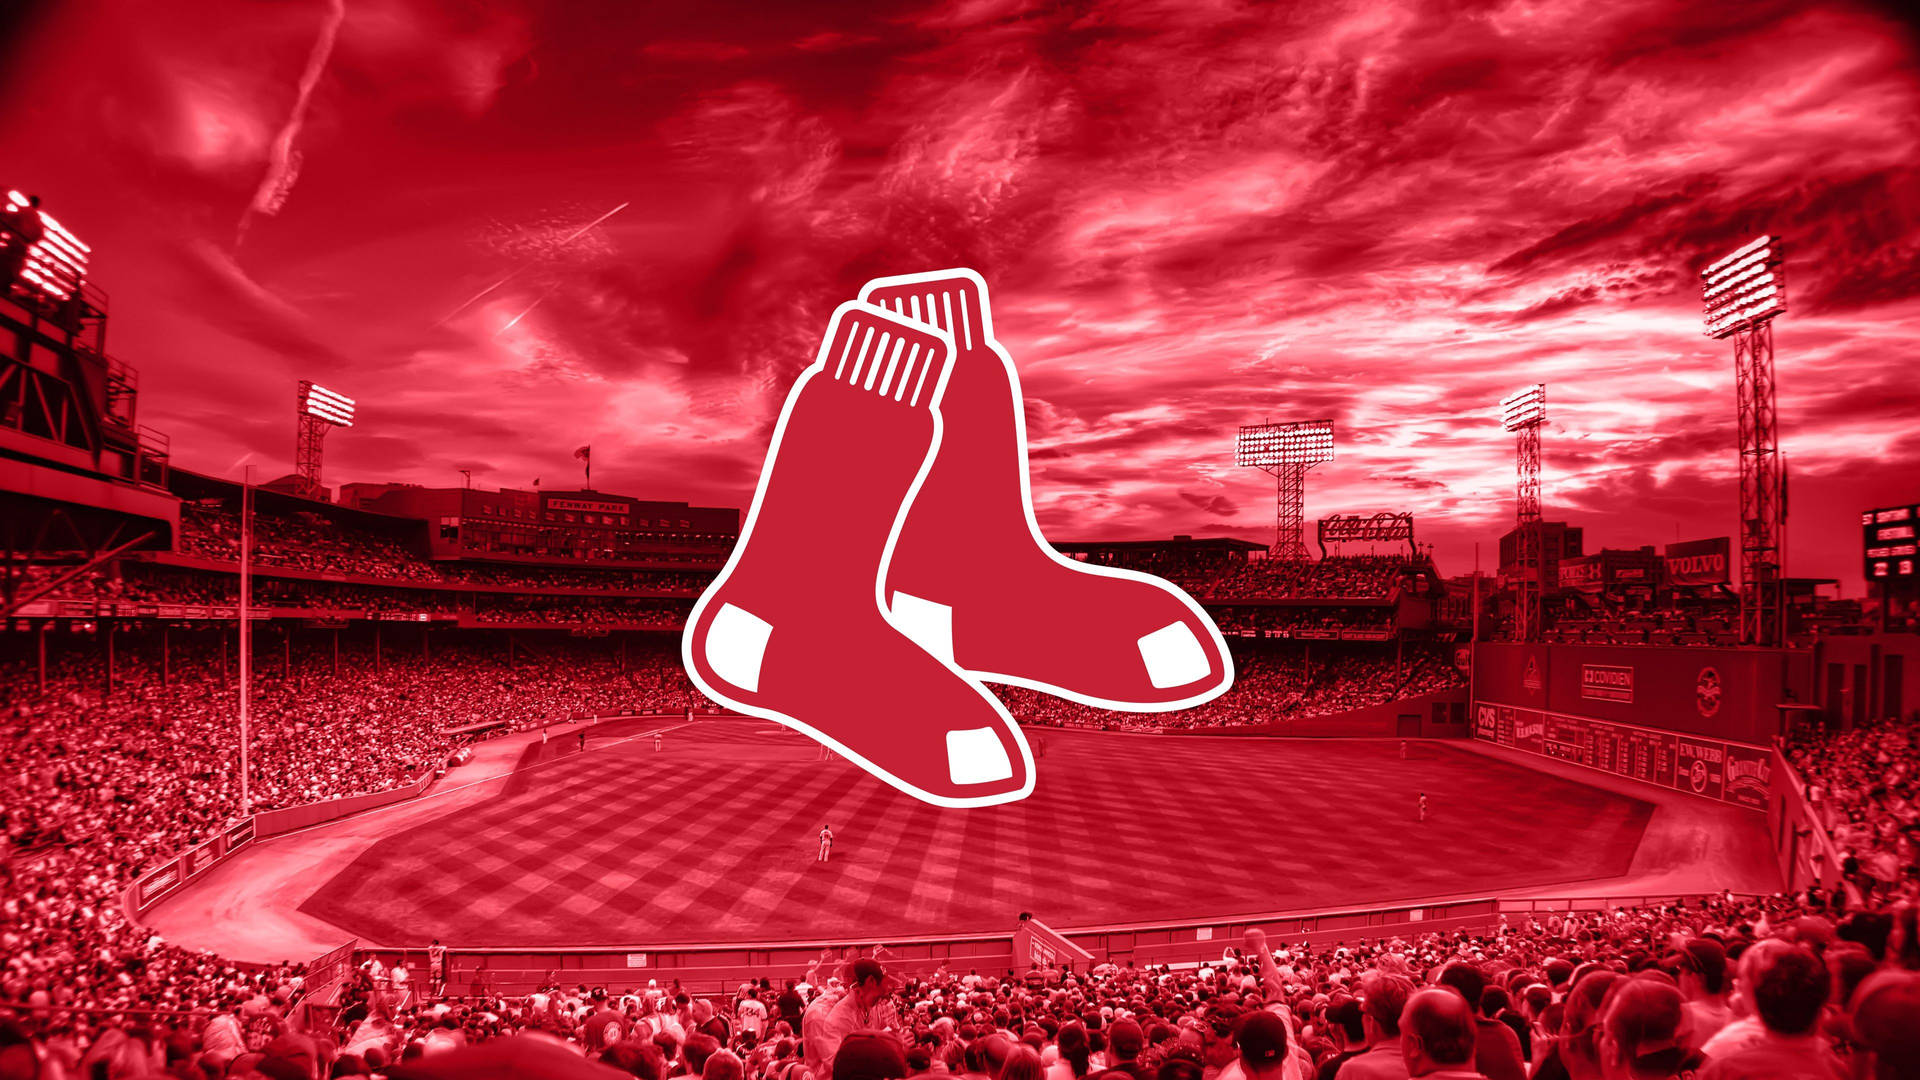 Red Sox Over A Red Field